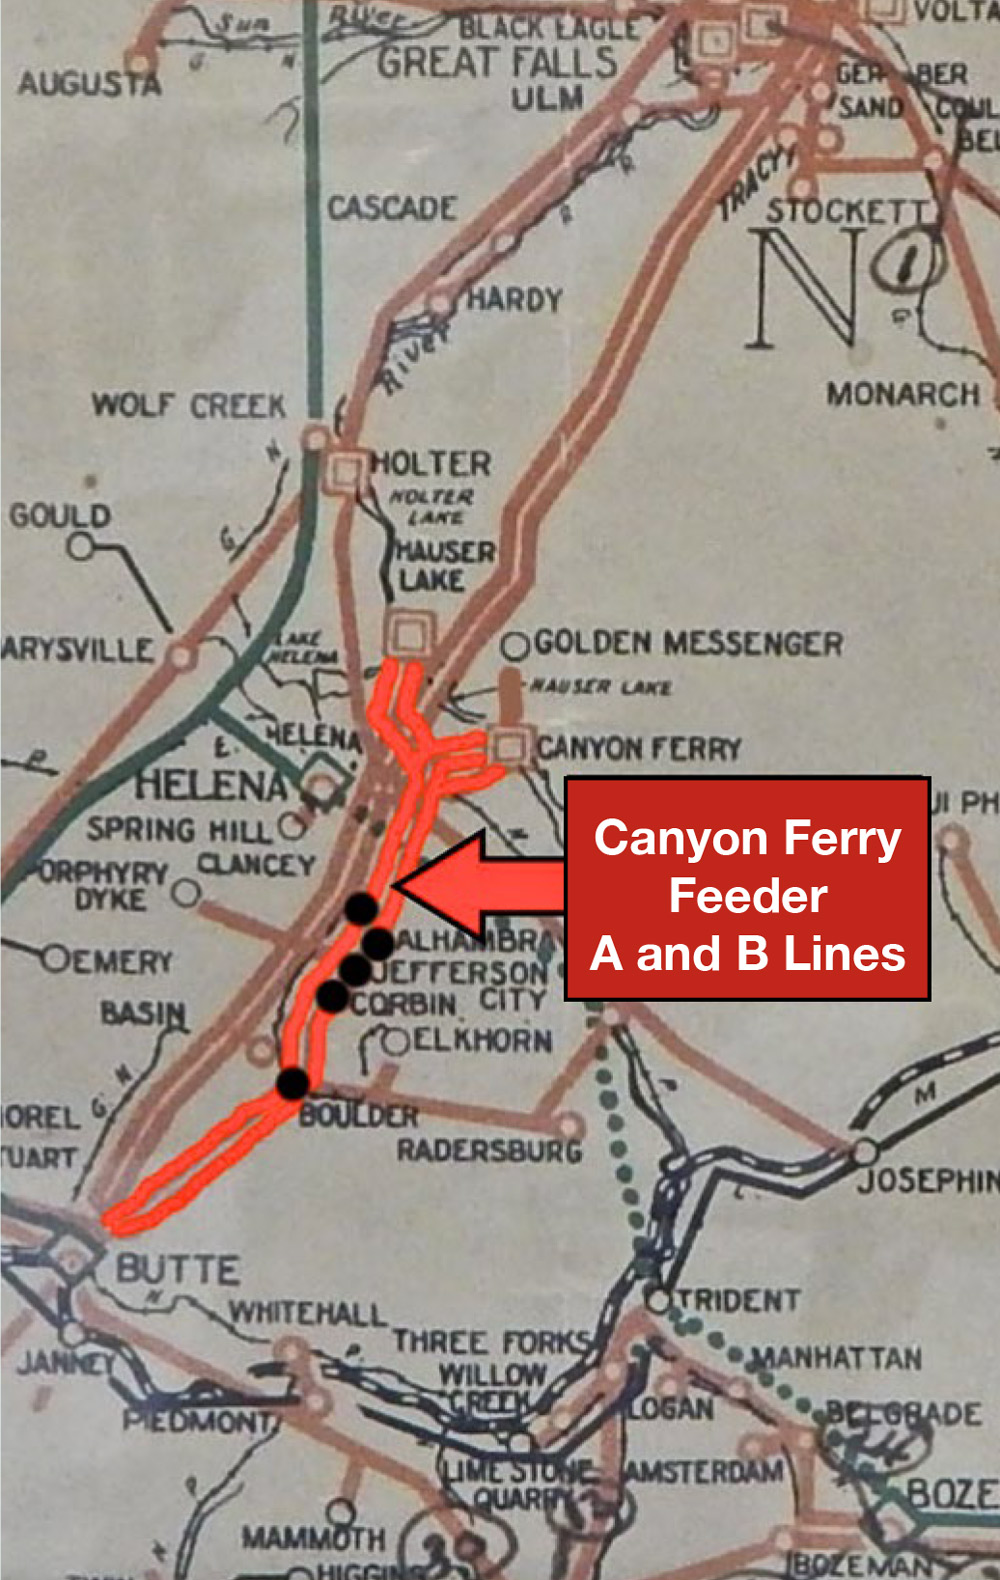 Canyon Ferry Feeder
A and B Lines